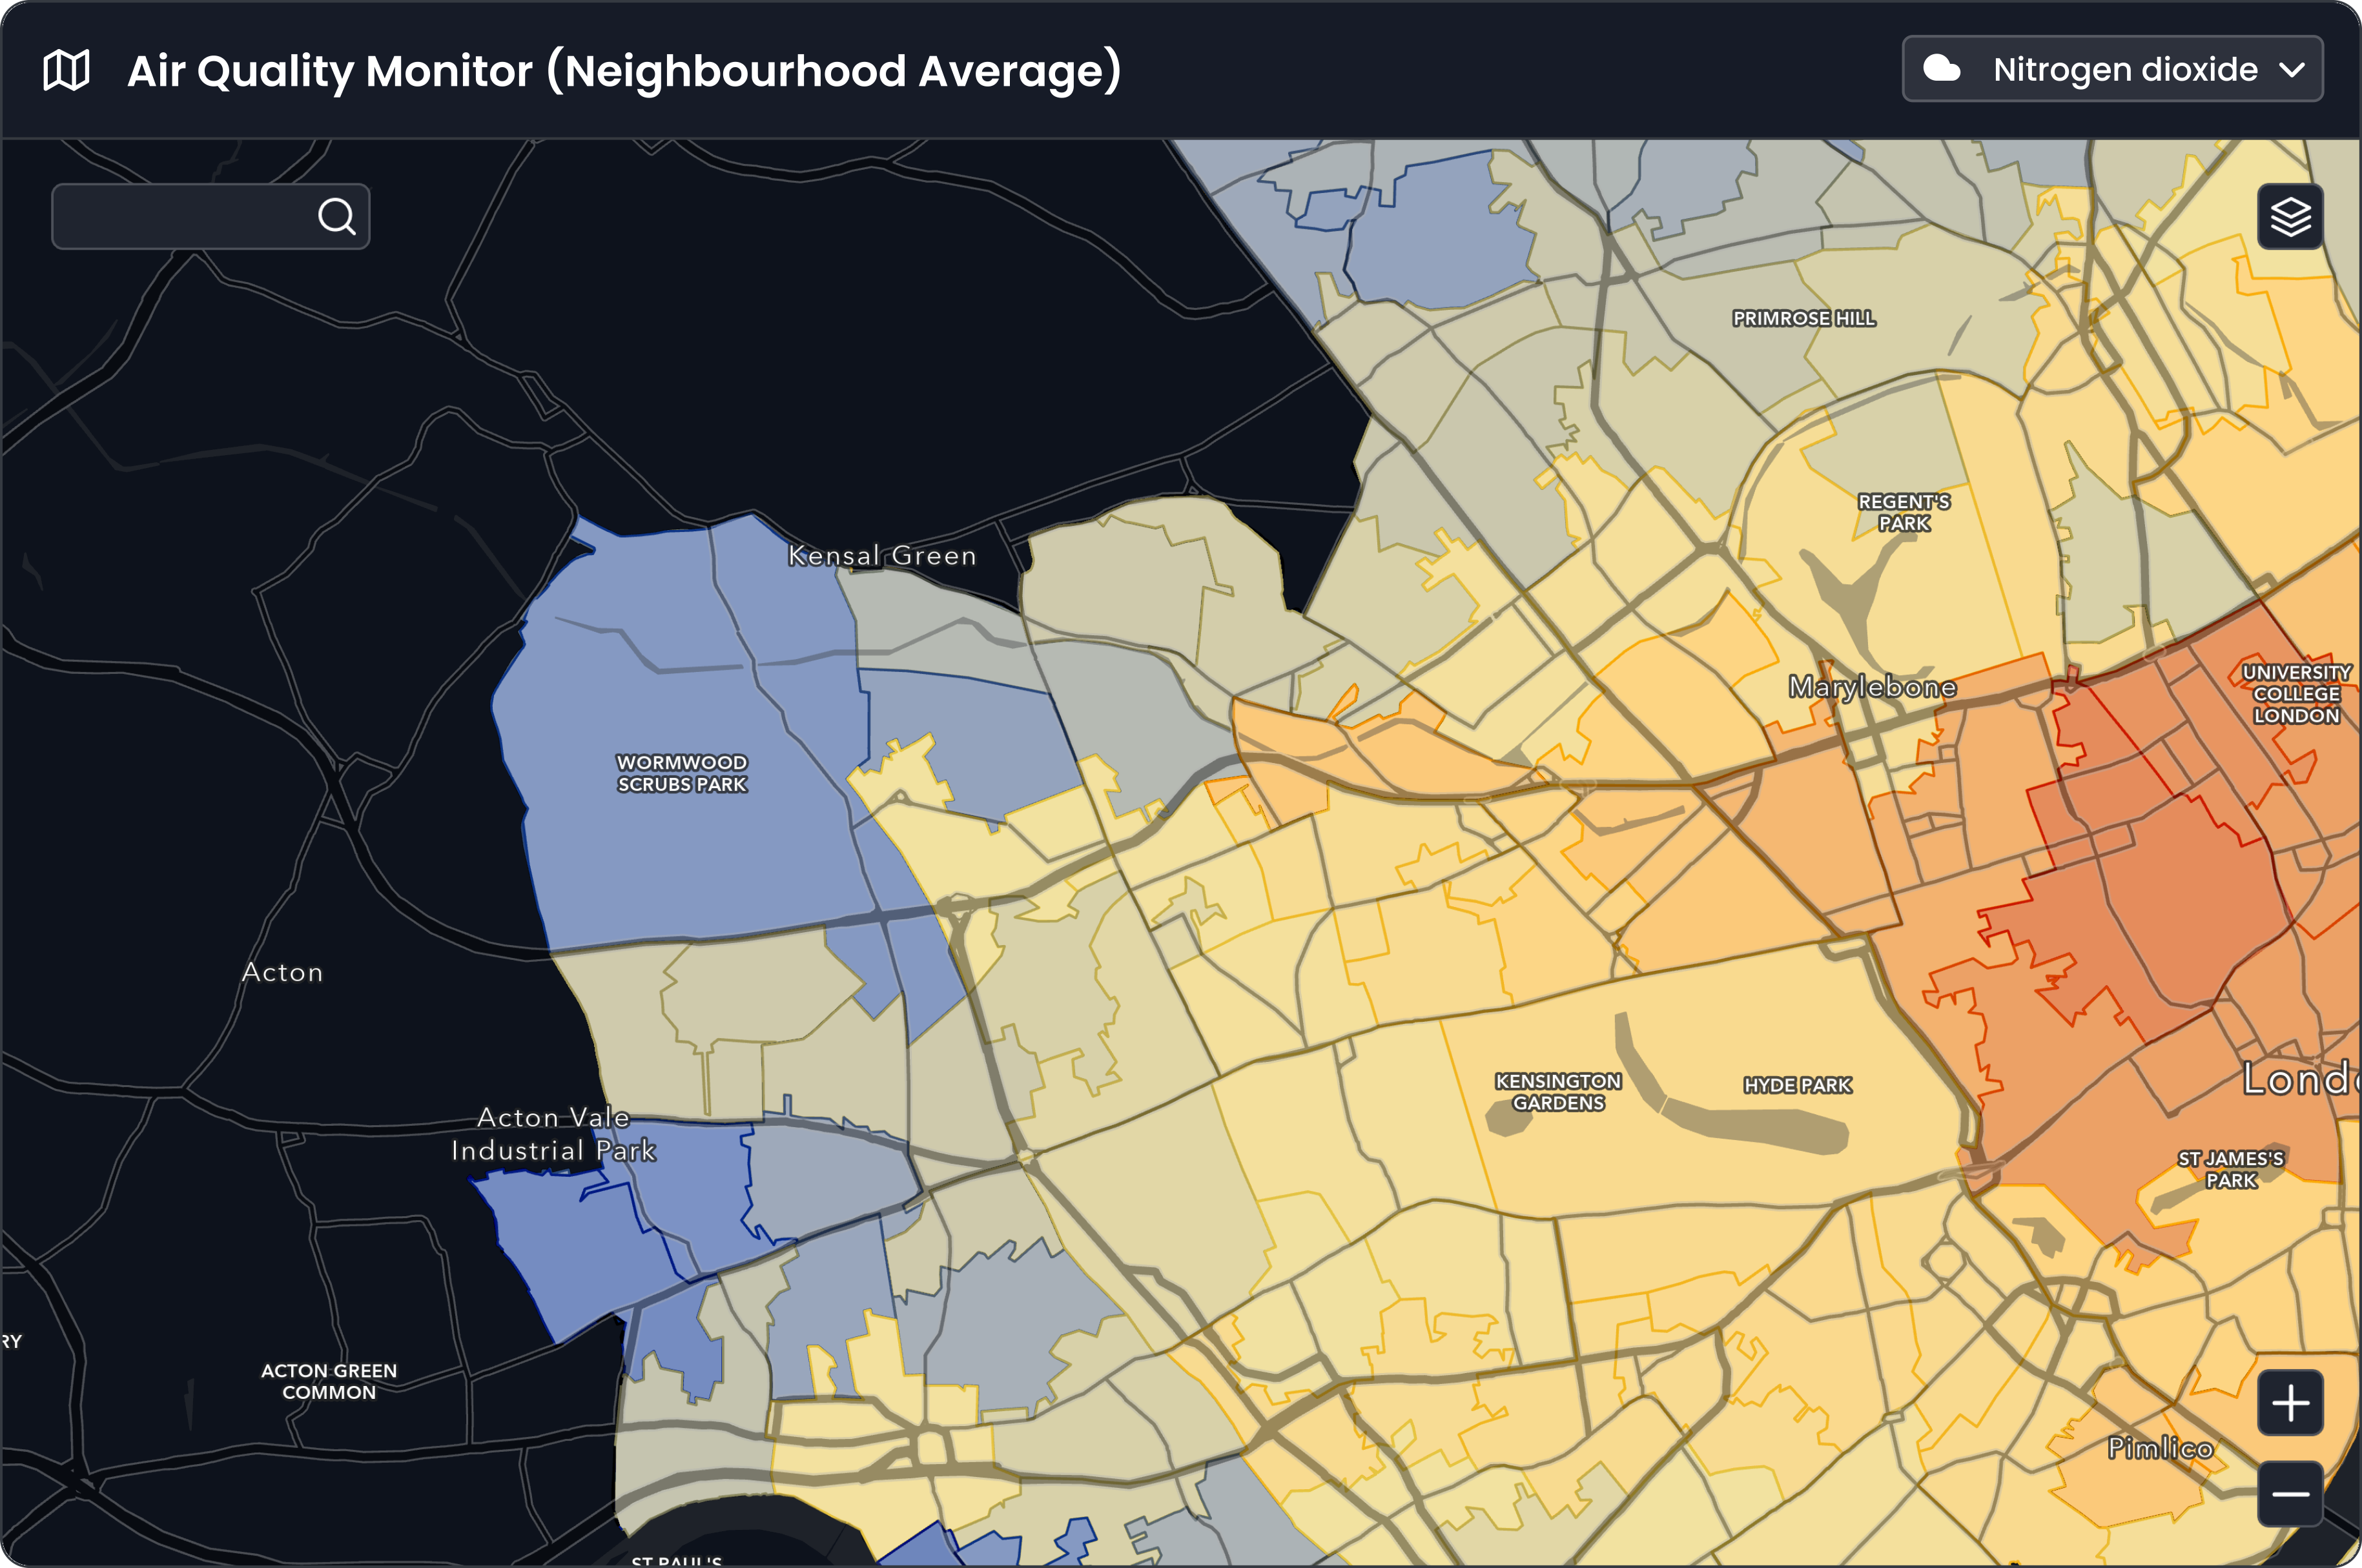 Insight into the air quality within neighbourhoods